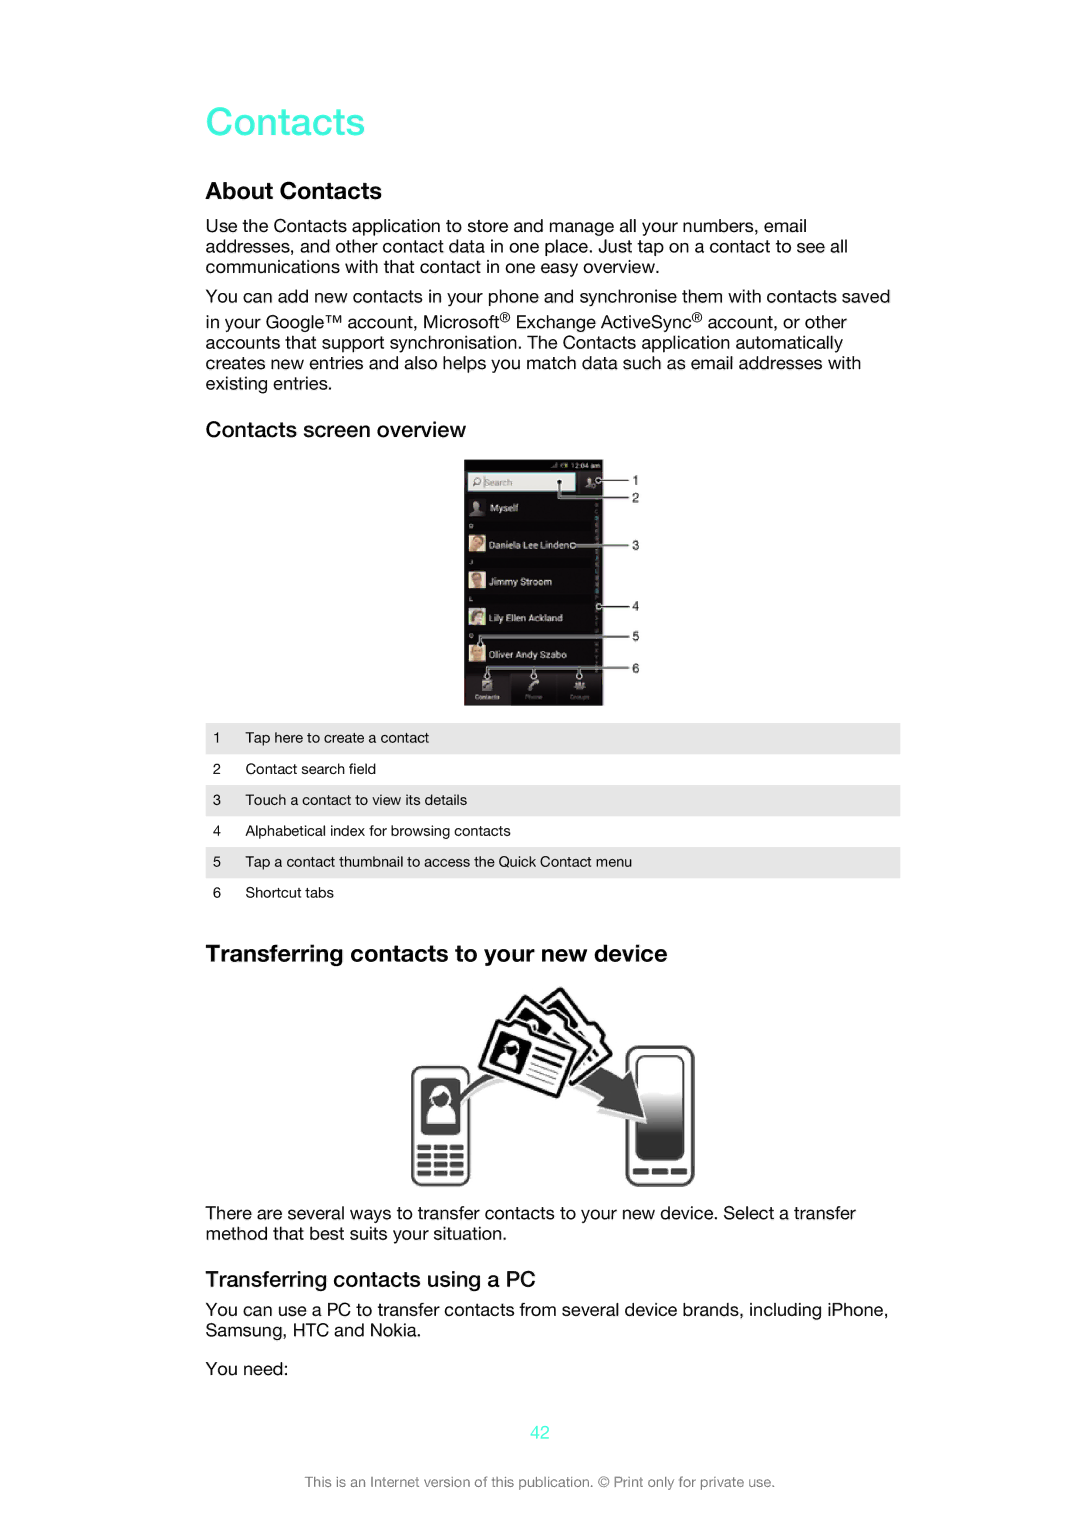 Sony ST26i/ST26a manual About Contacts, Transferring contacts to your new device, Contacts screen overview 